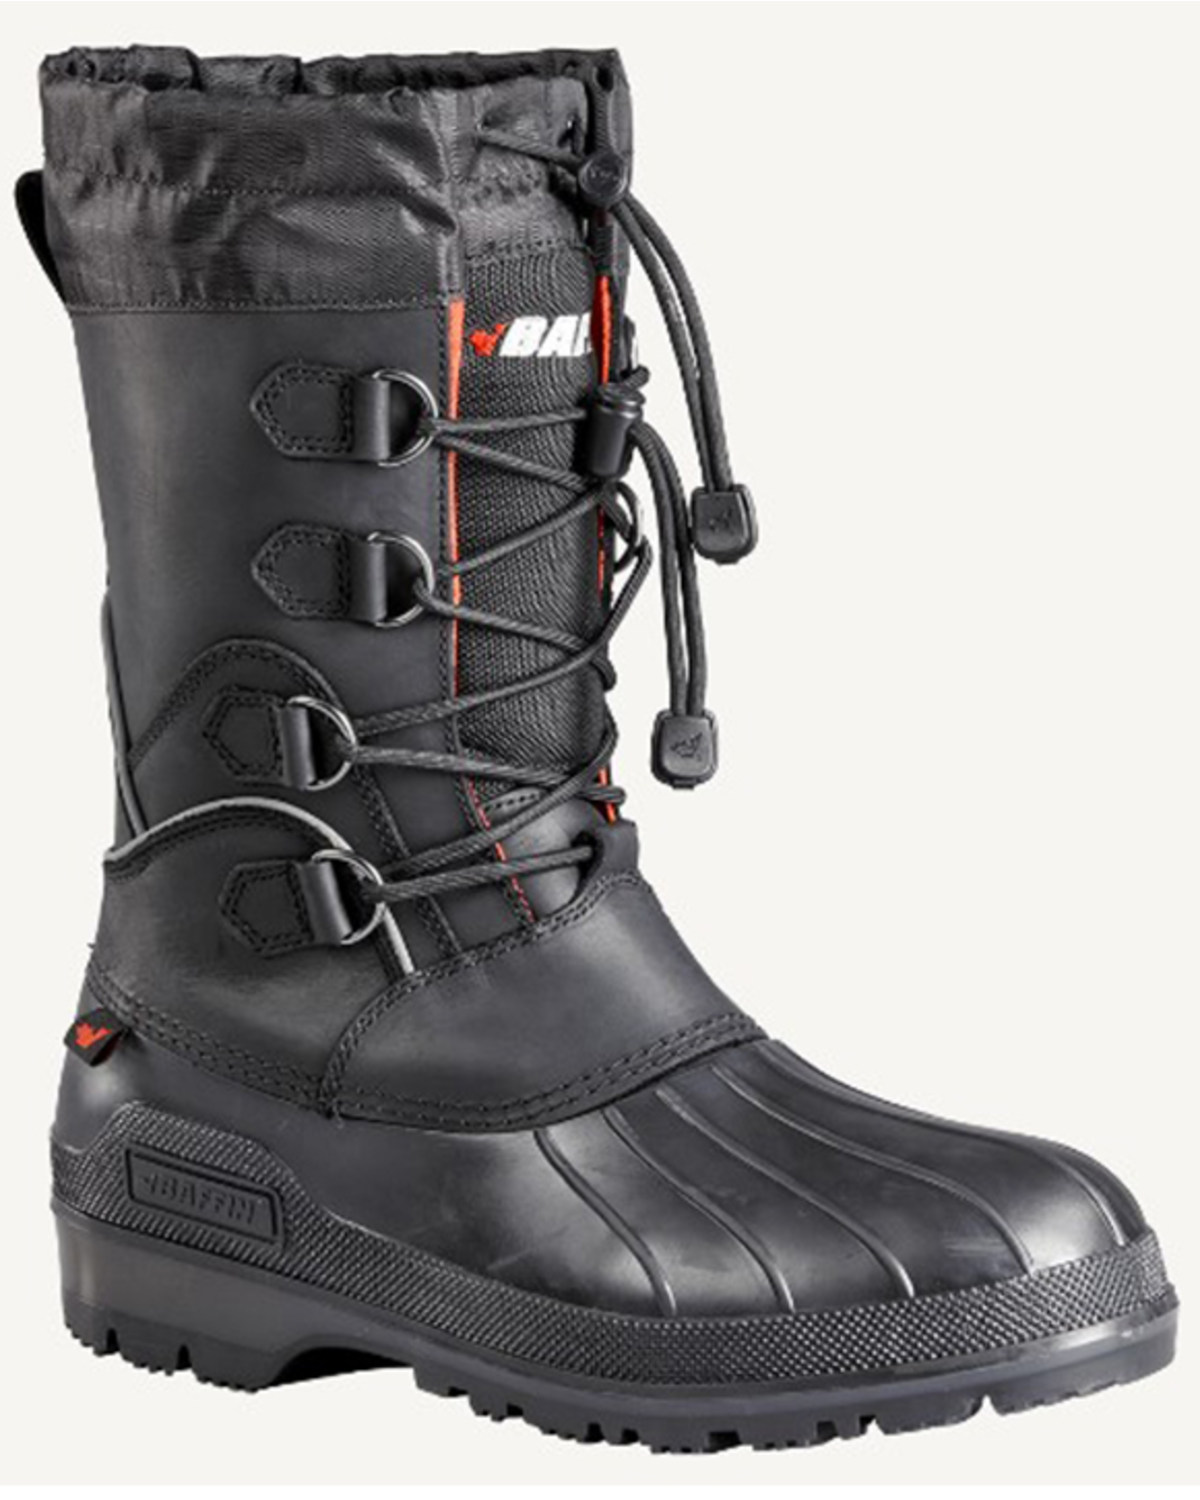 Baffin Men's Cambrian Insulated Waterproof Boots